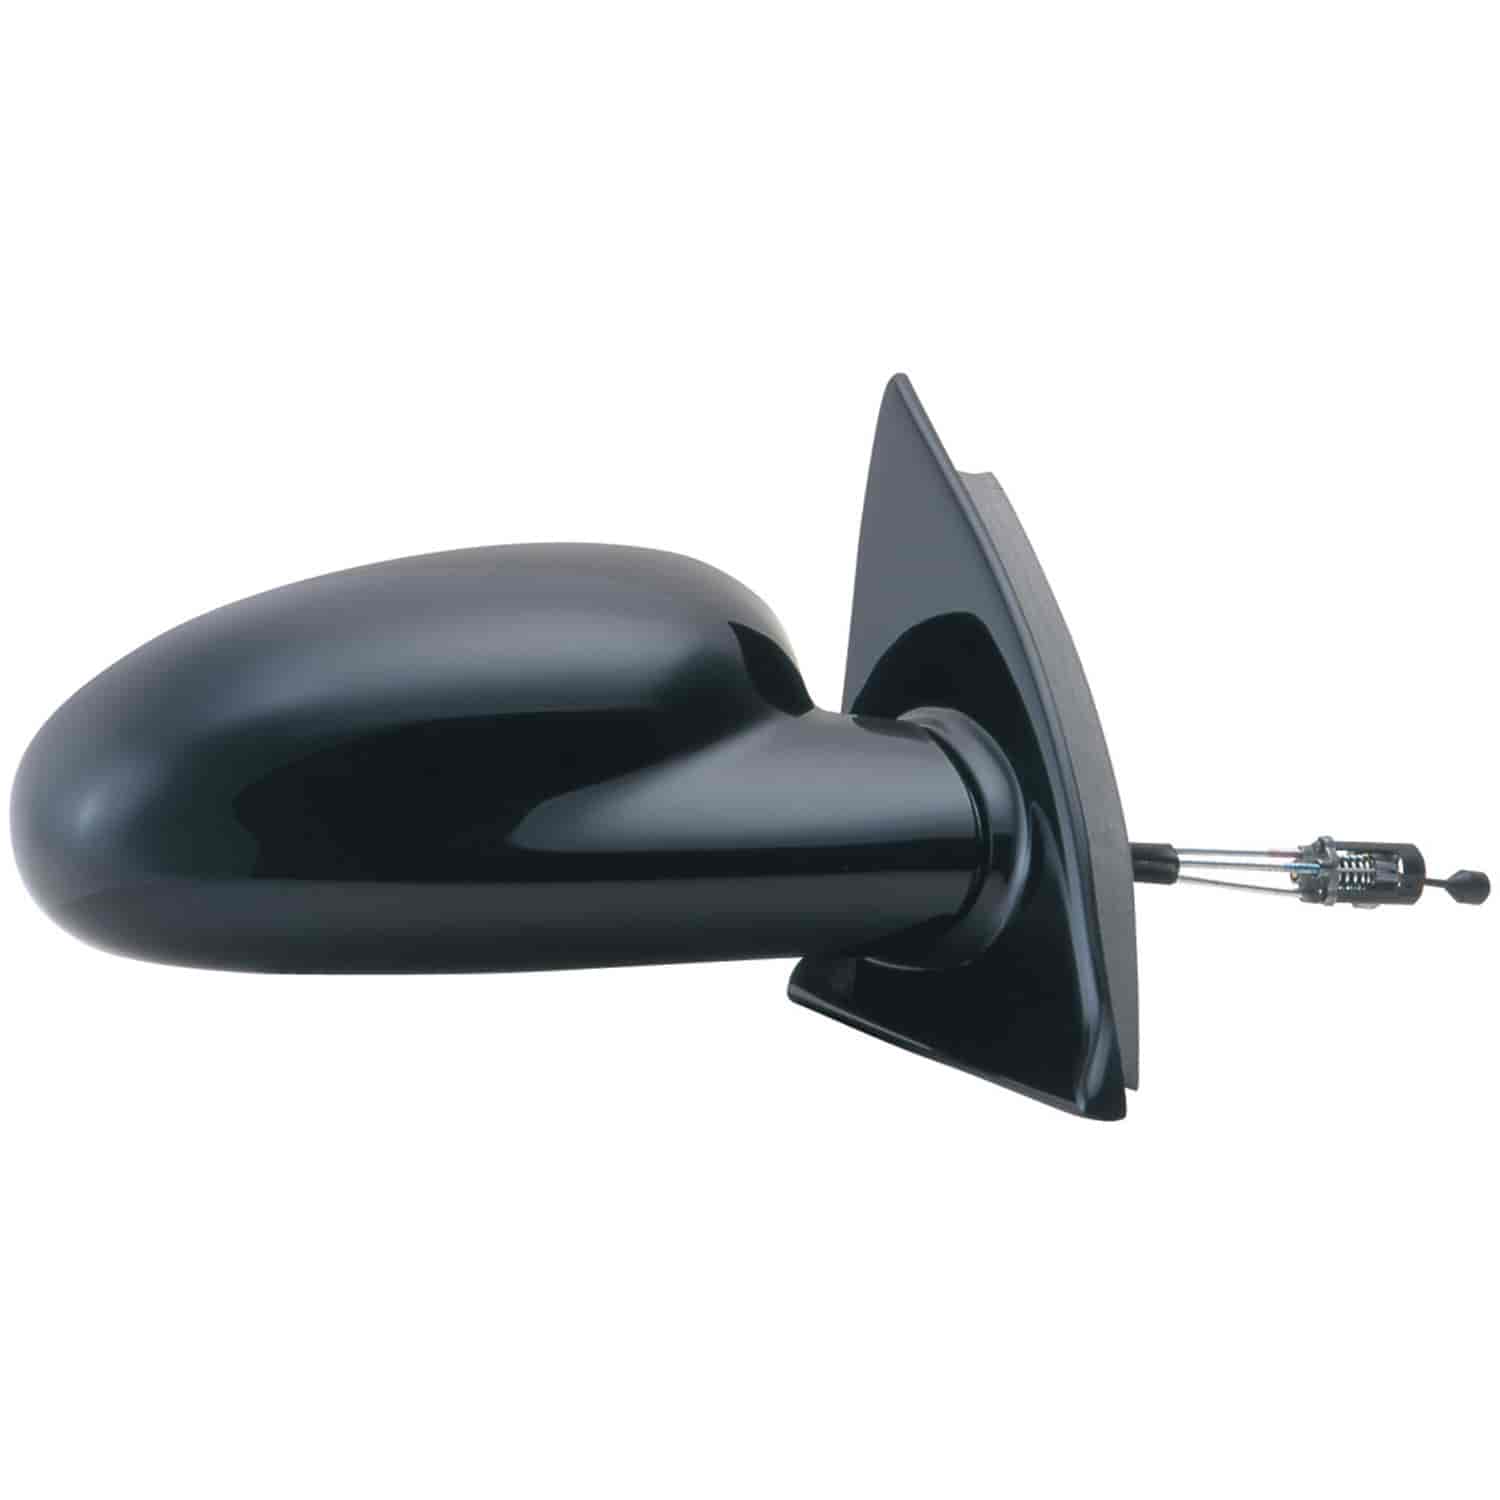 OEM Style Replacement mirror for 97-02 Saturn S Series Coupe passenger side mirror tested to fit and